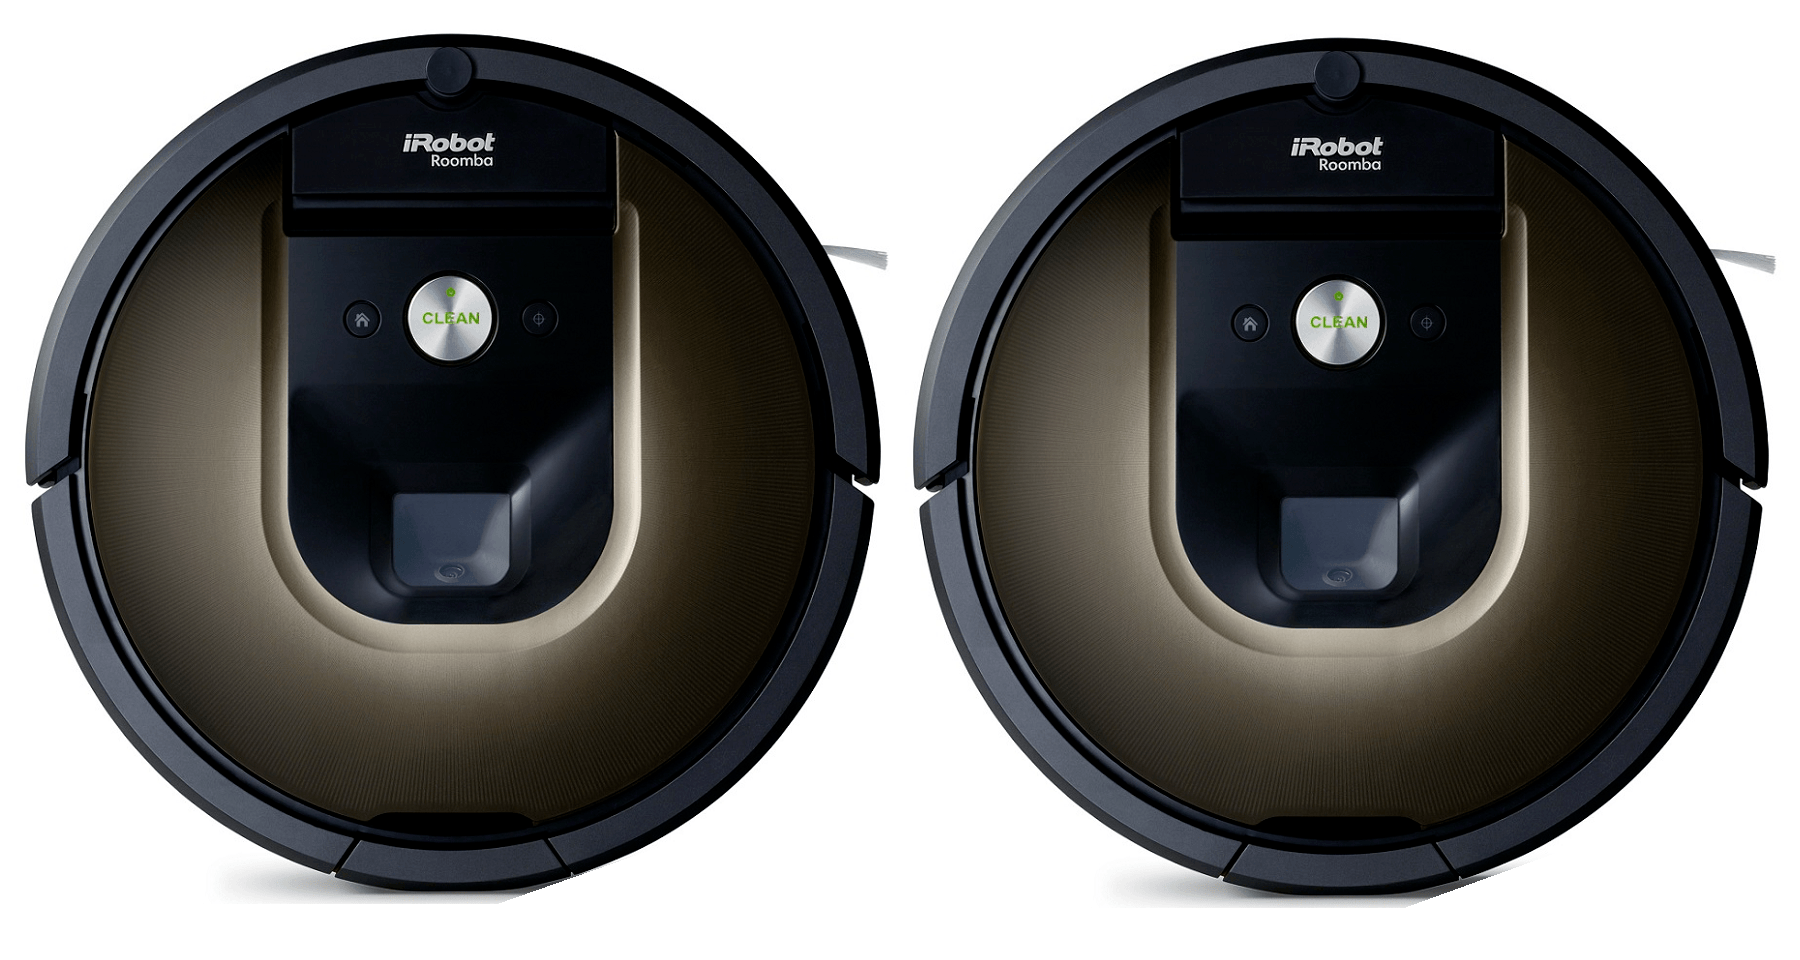 Roomba vs 985 - These Are the Differences